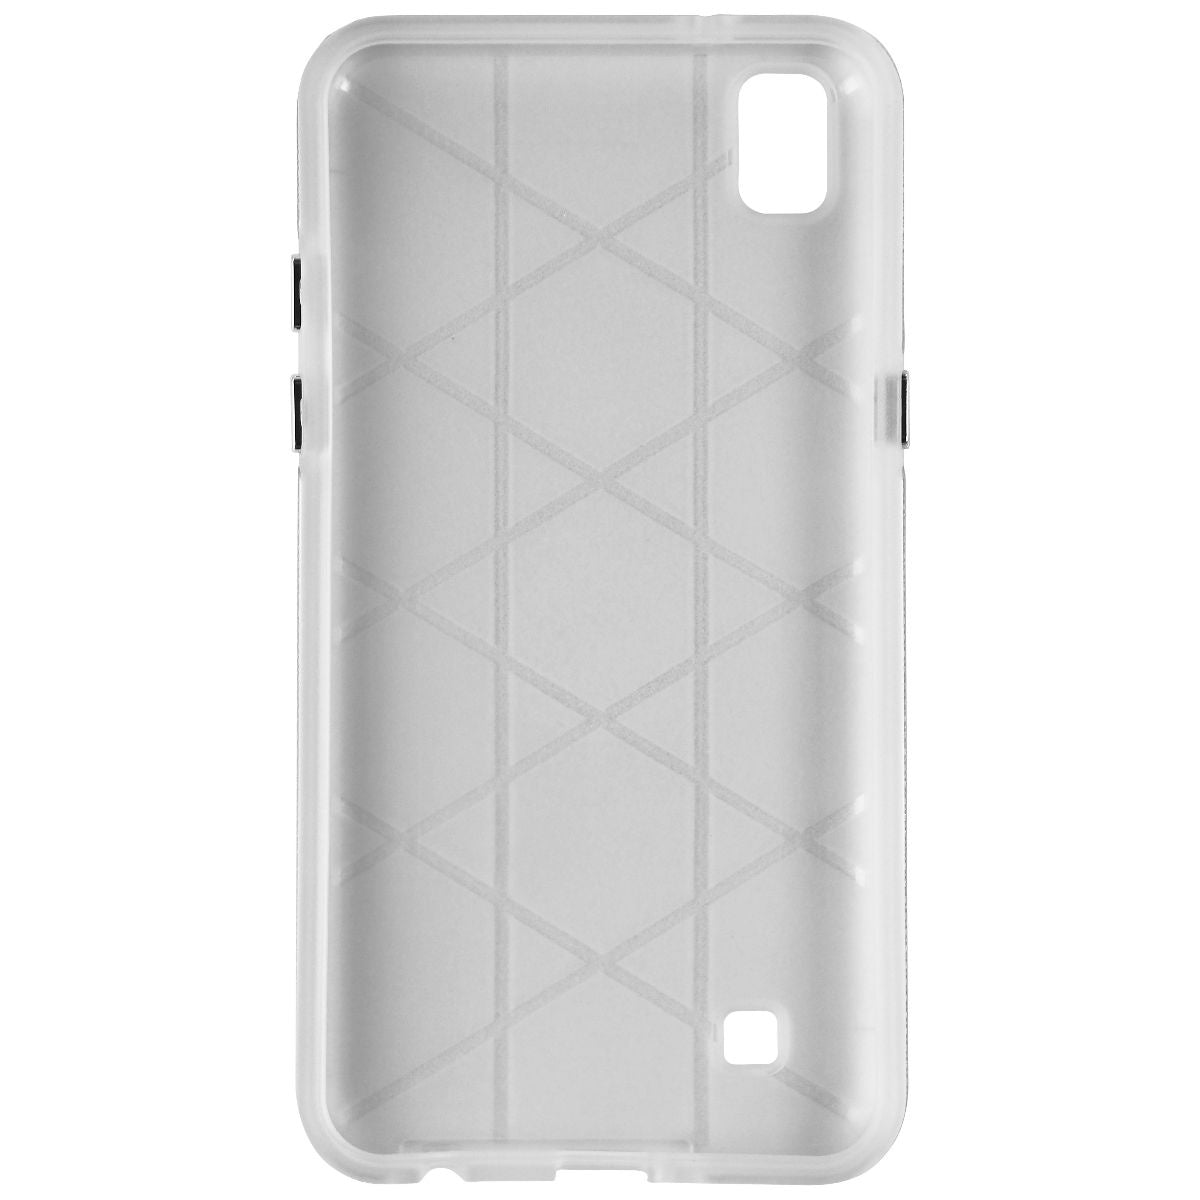 Avoca MobilePro Hardshell Case for LG X Power (2016 Model) - Silver/Frost Cell Phone - Cases, Covers & Skins Avoca    - Simple Cell Bulk Wholesale Pricing - USA Seller